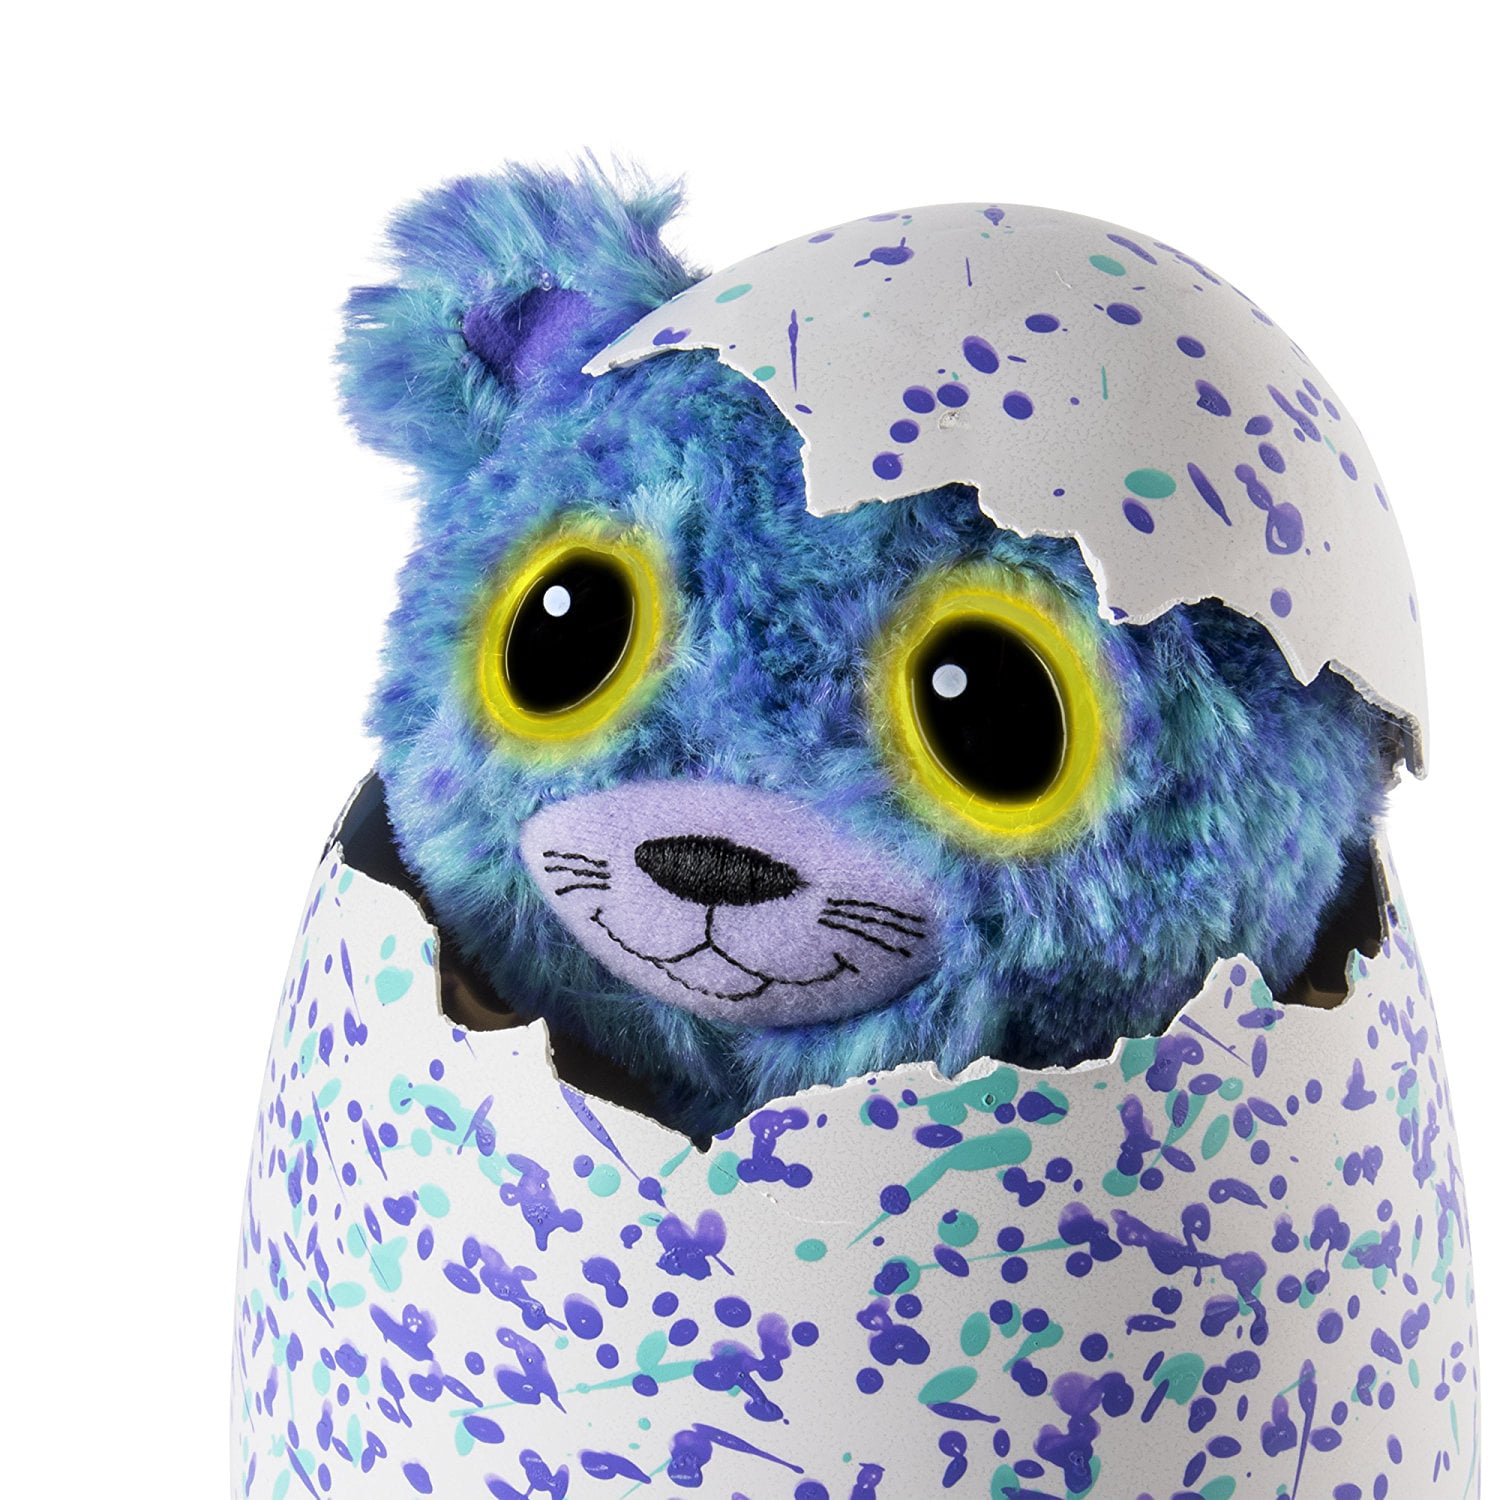 Hatchimals Surprise Peacat Hatching Egg with Surprise Twin In Hand Fast Shipping 